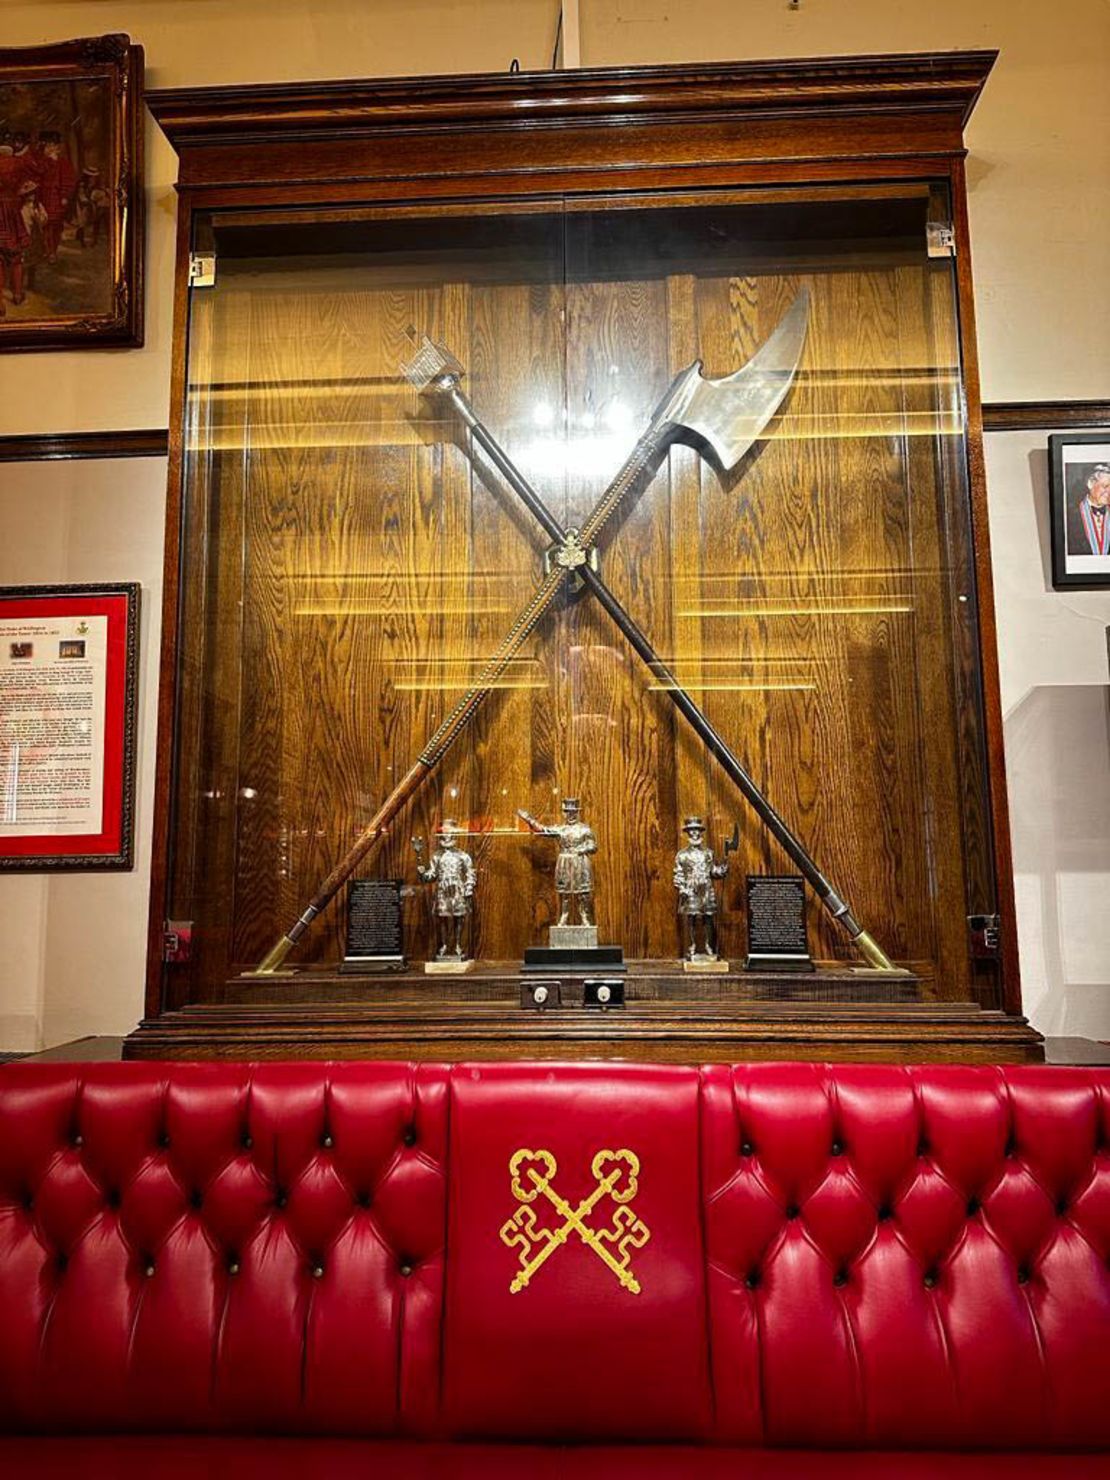 A 16th century ceremonial ax is among the items displayed on the pub's walls.